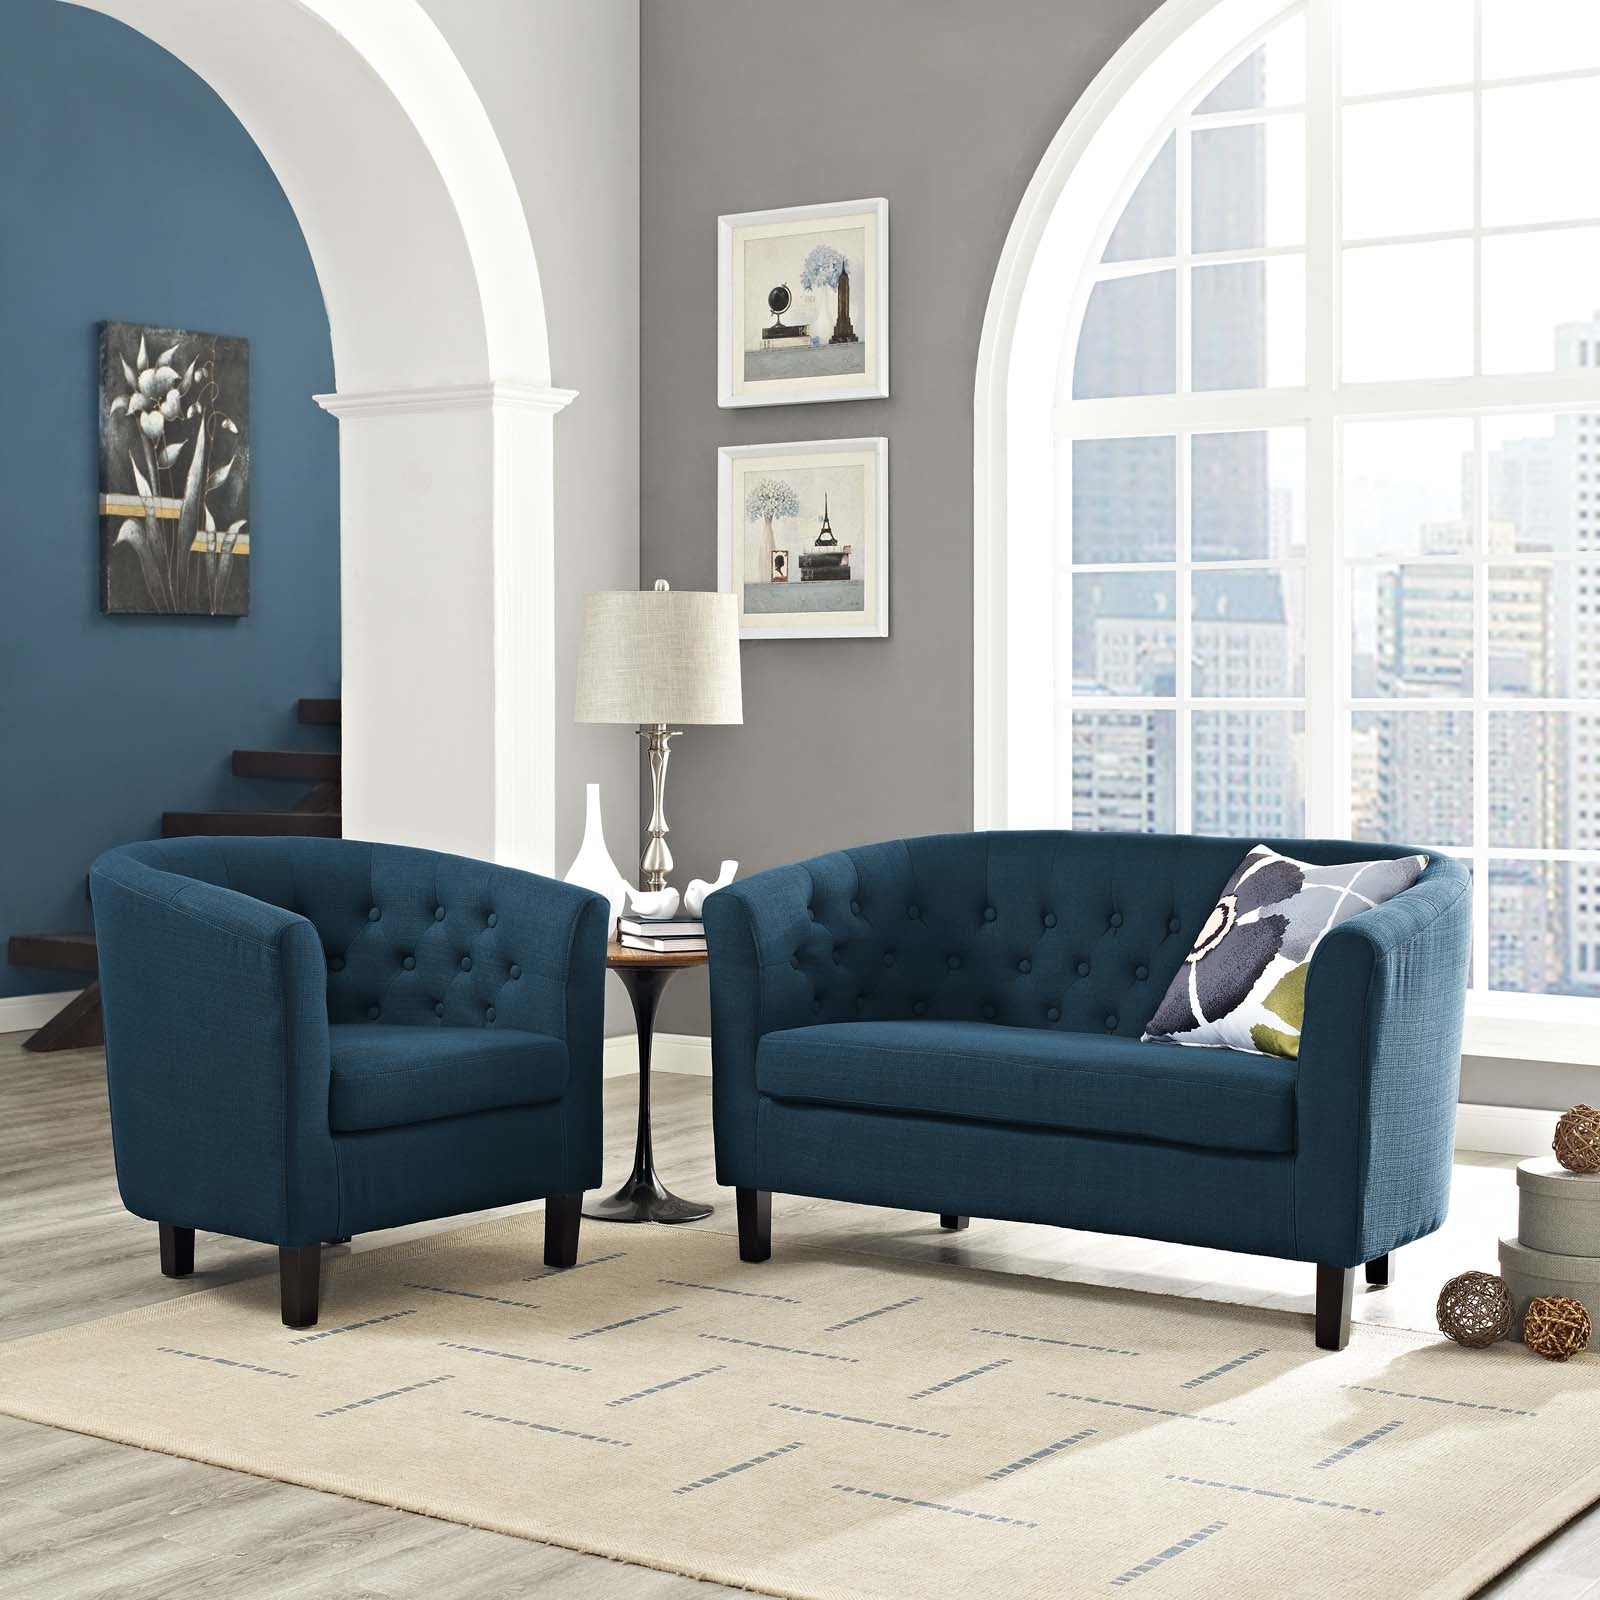 Prospect 2 Piece Upholstered Fabric Loveseat and Armchair Set - East Shore Modern Home Furnishings